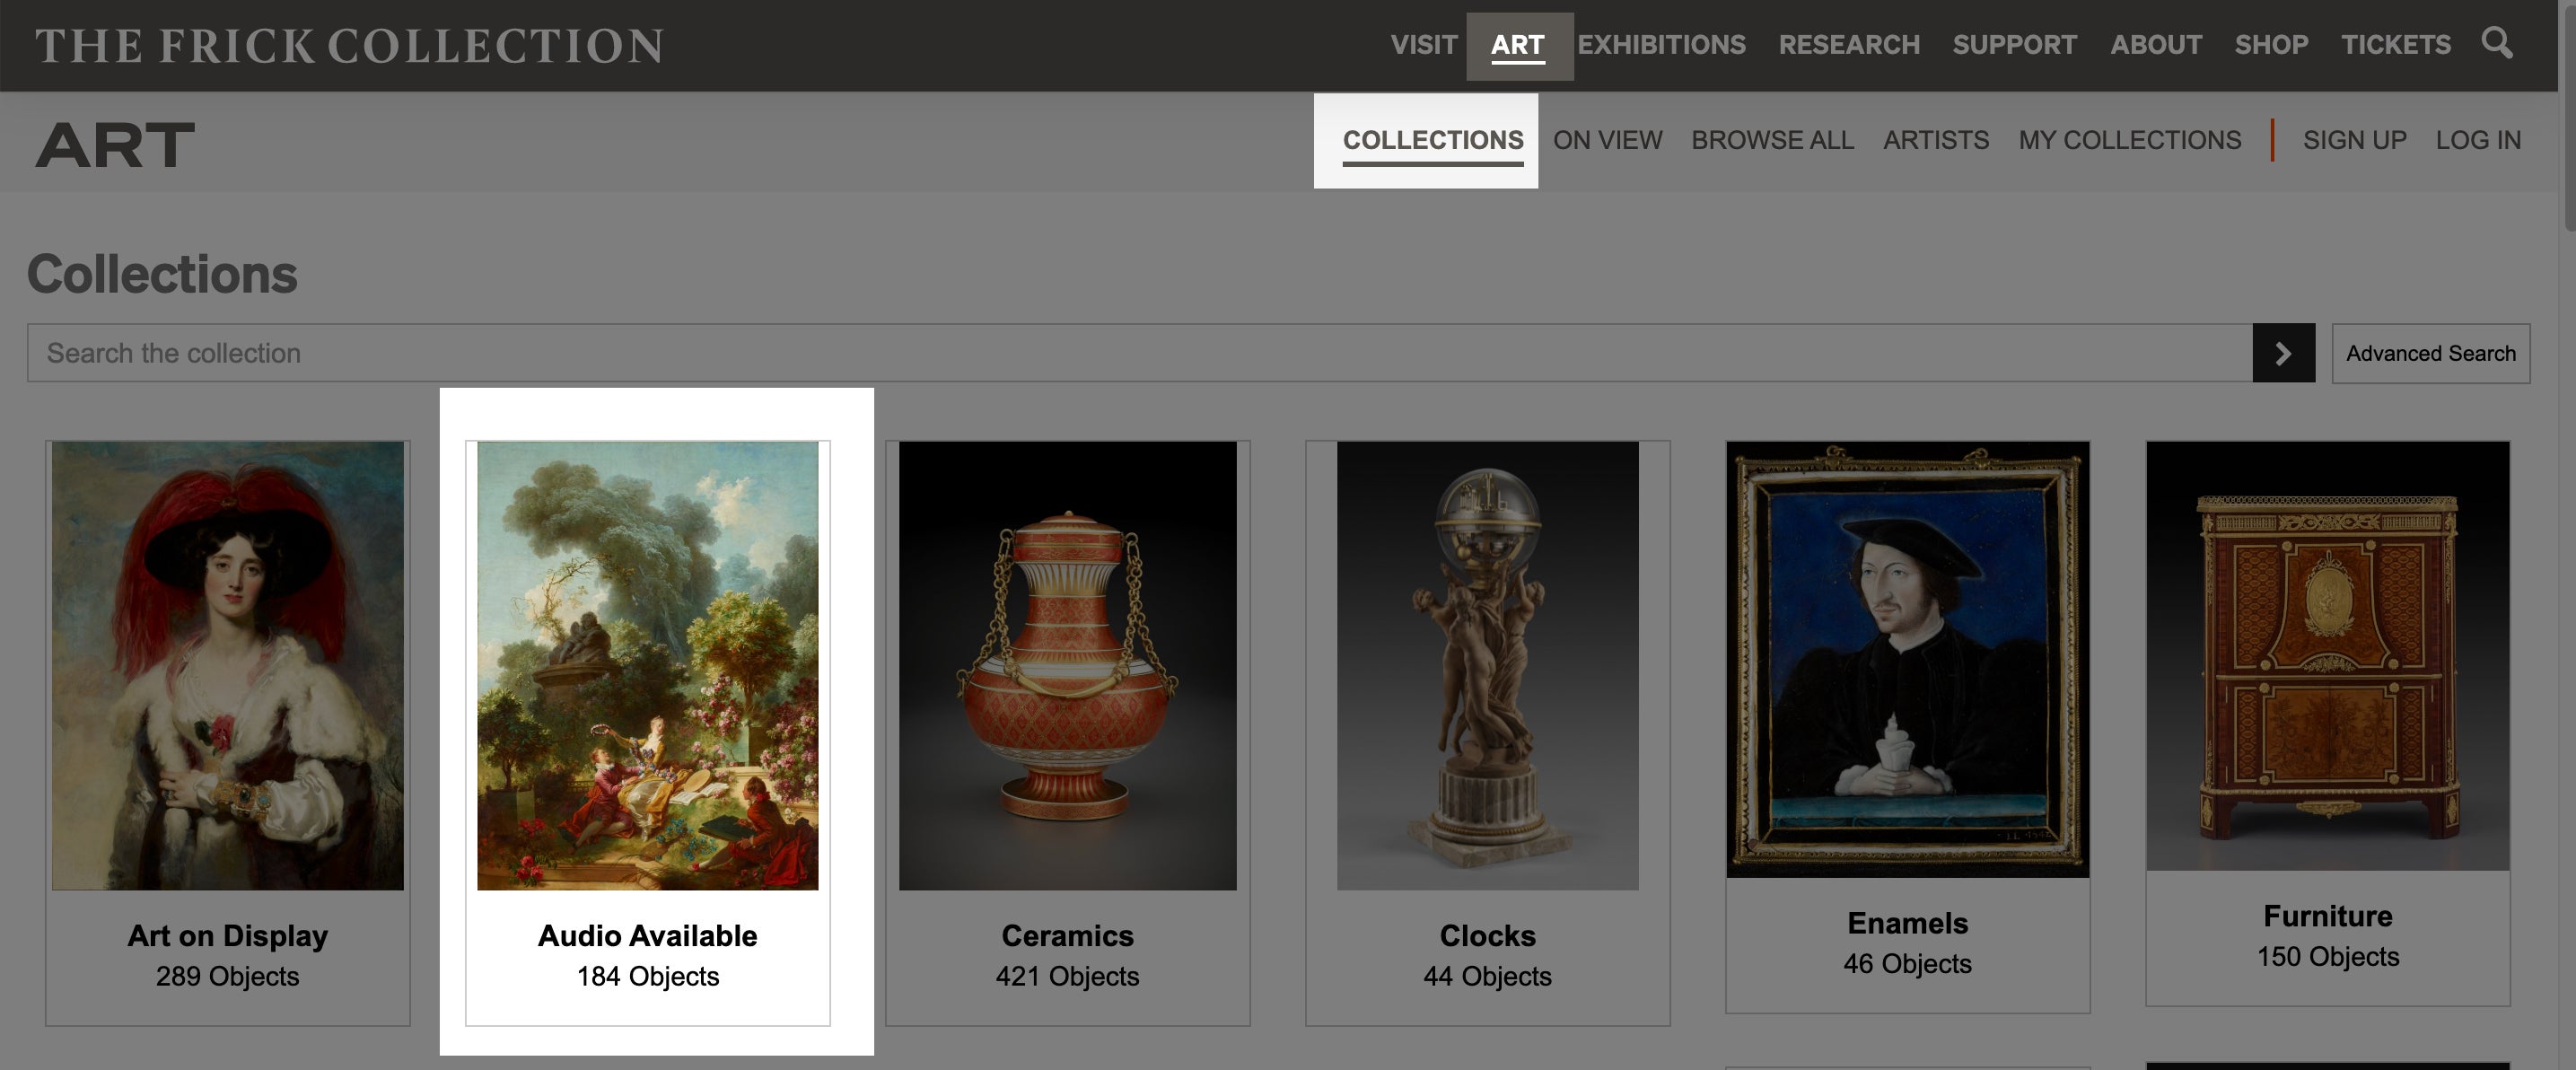 screenshot of a collection of objects with audio available